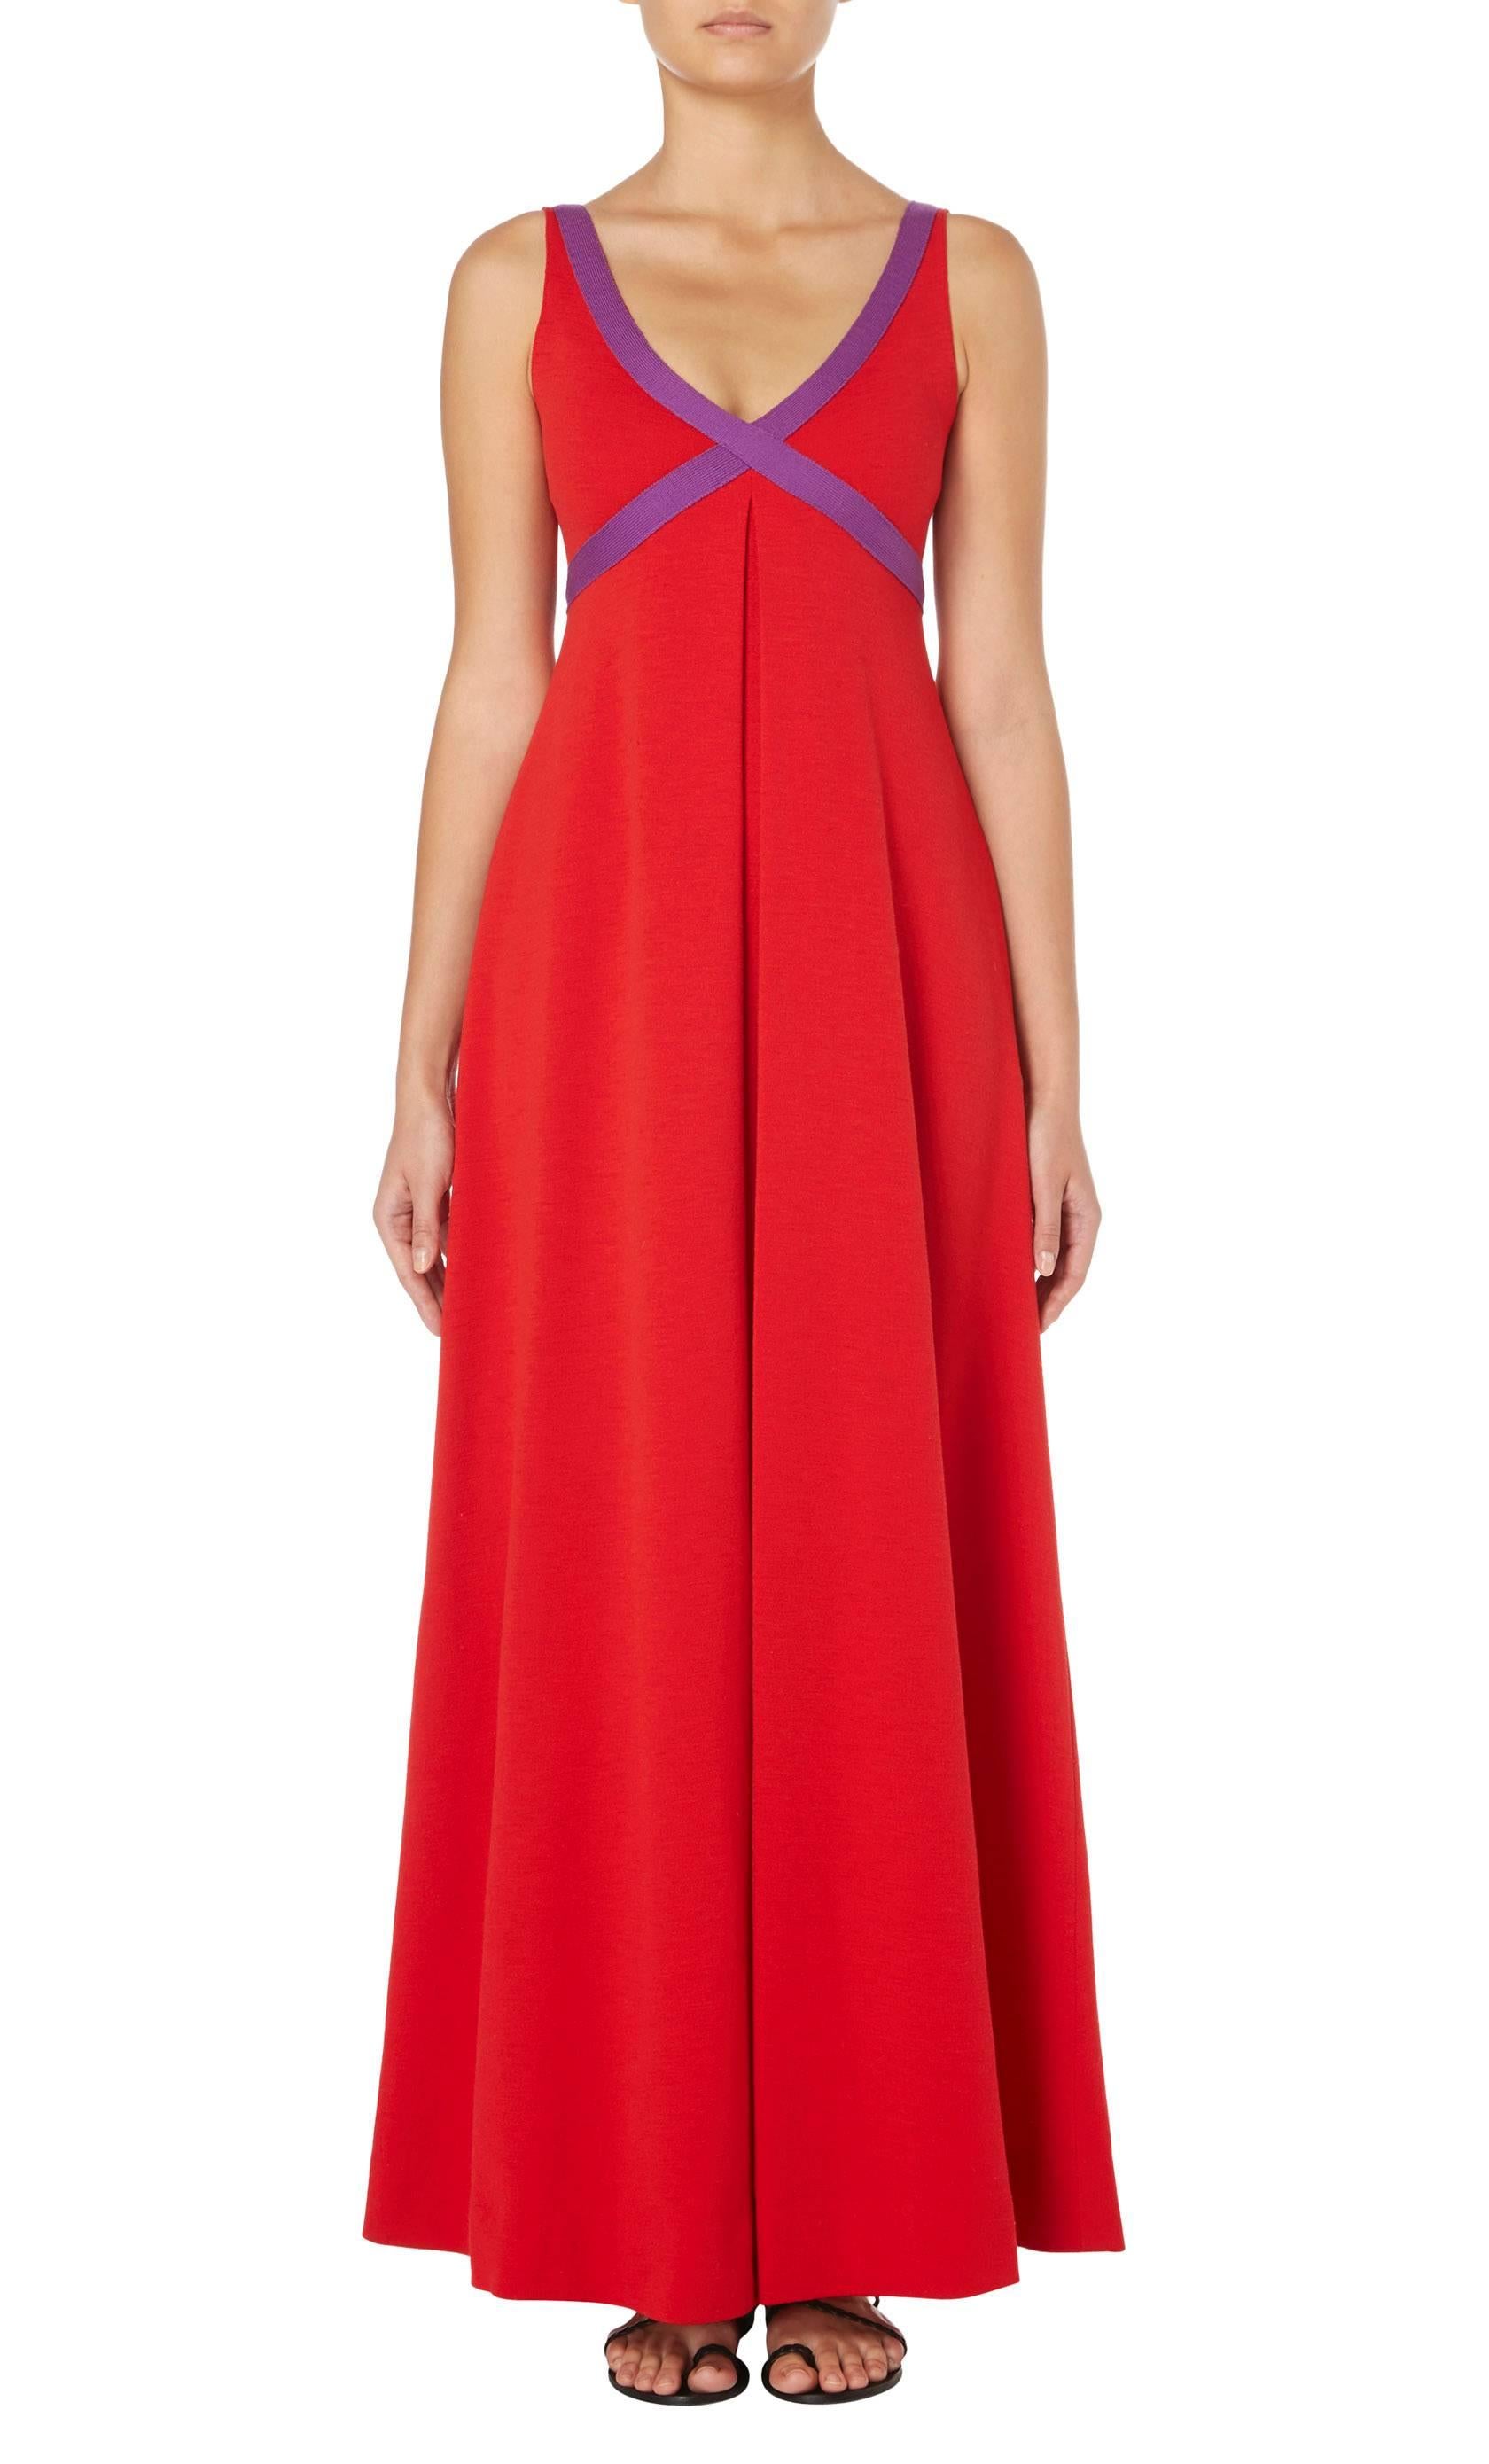 A fantastic example of Rudi Gernreich’s signature knitwear, this bold maxi dress is constructed in bright red wool and features a purple trim to the straps, crossing over the bust. Wide inverted pleats at the front and back create a pronounced